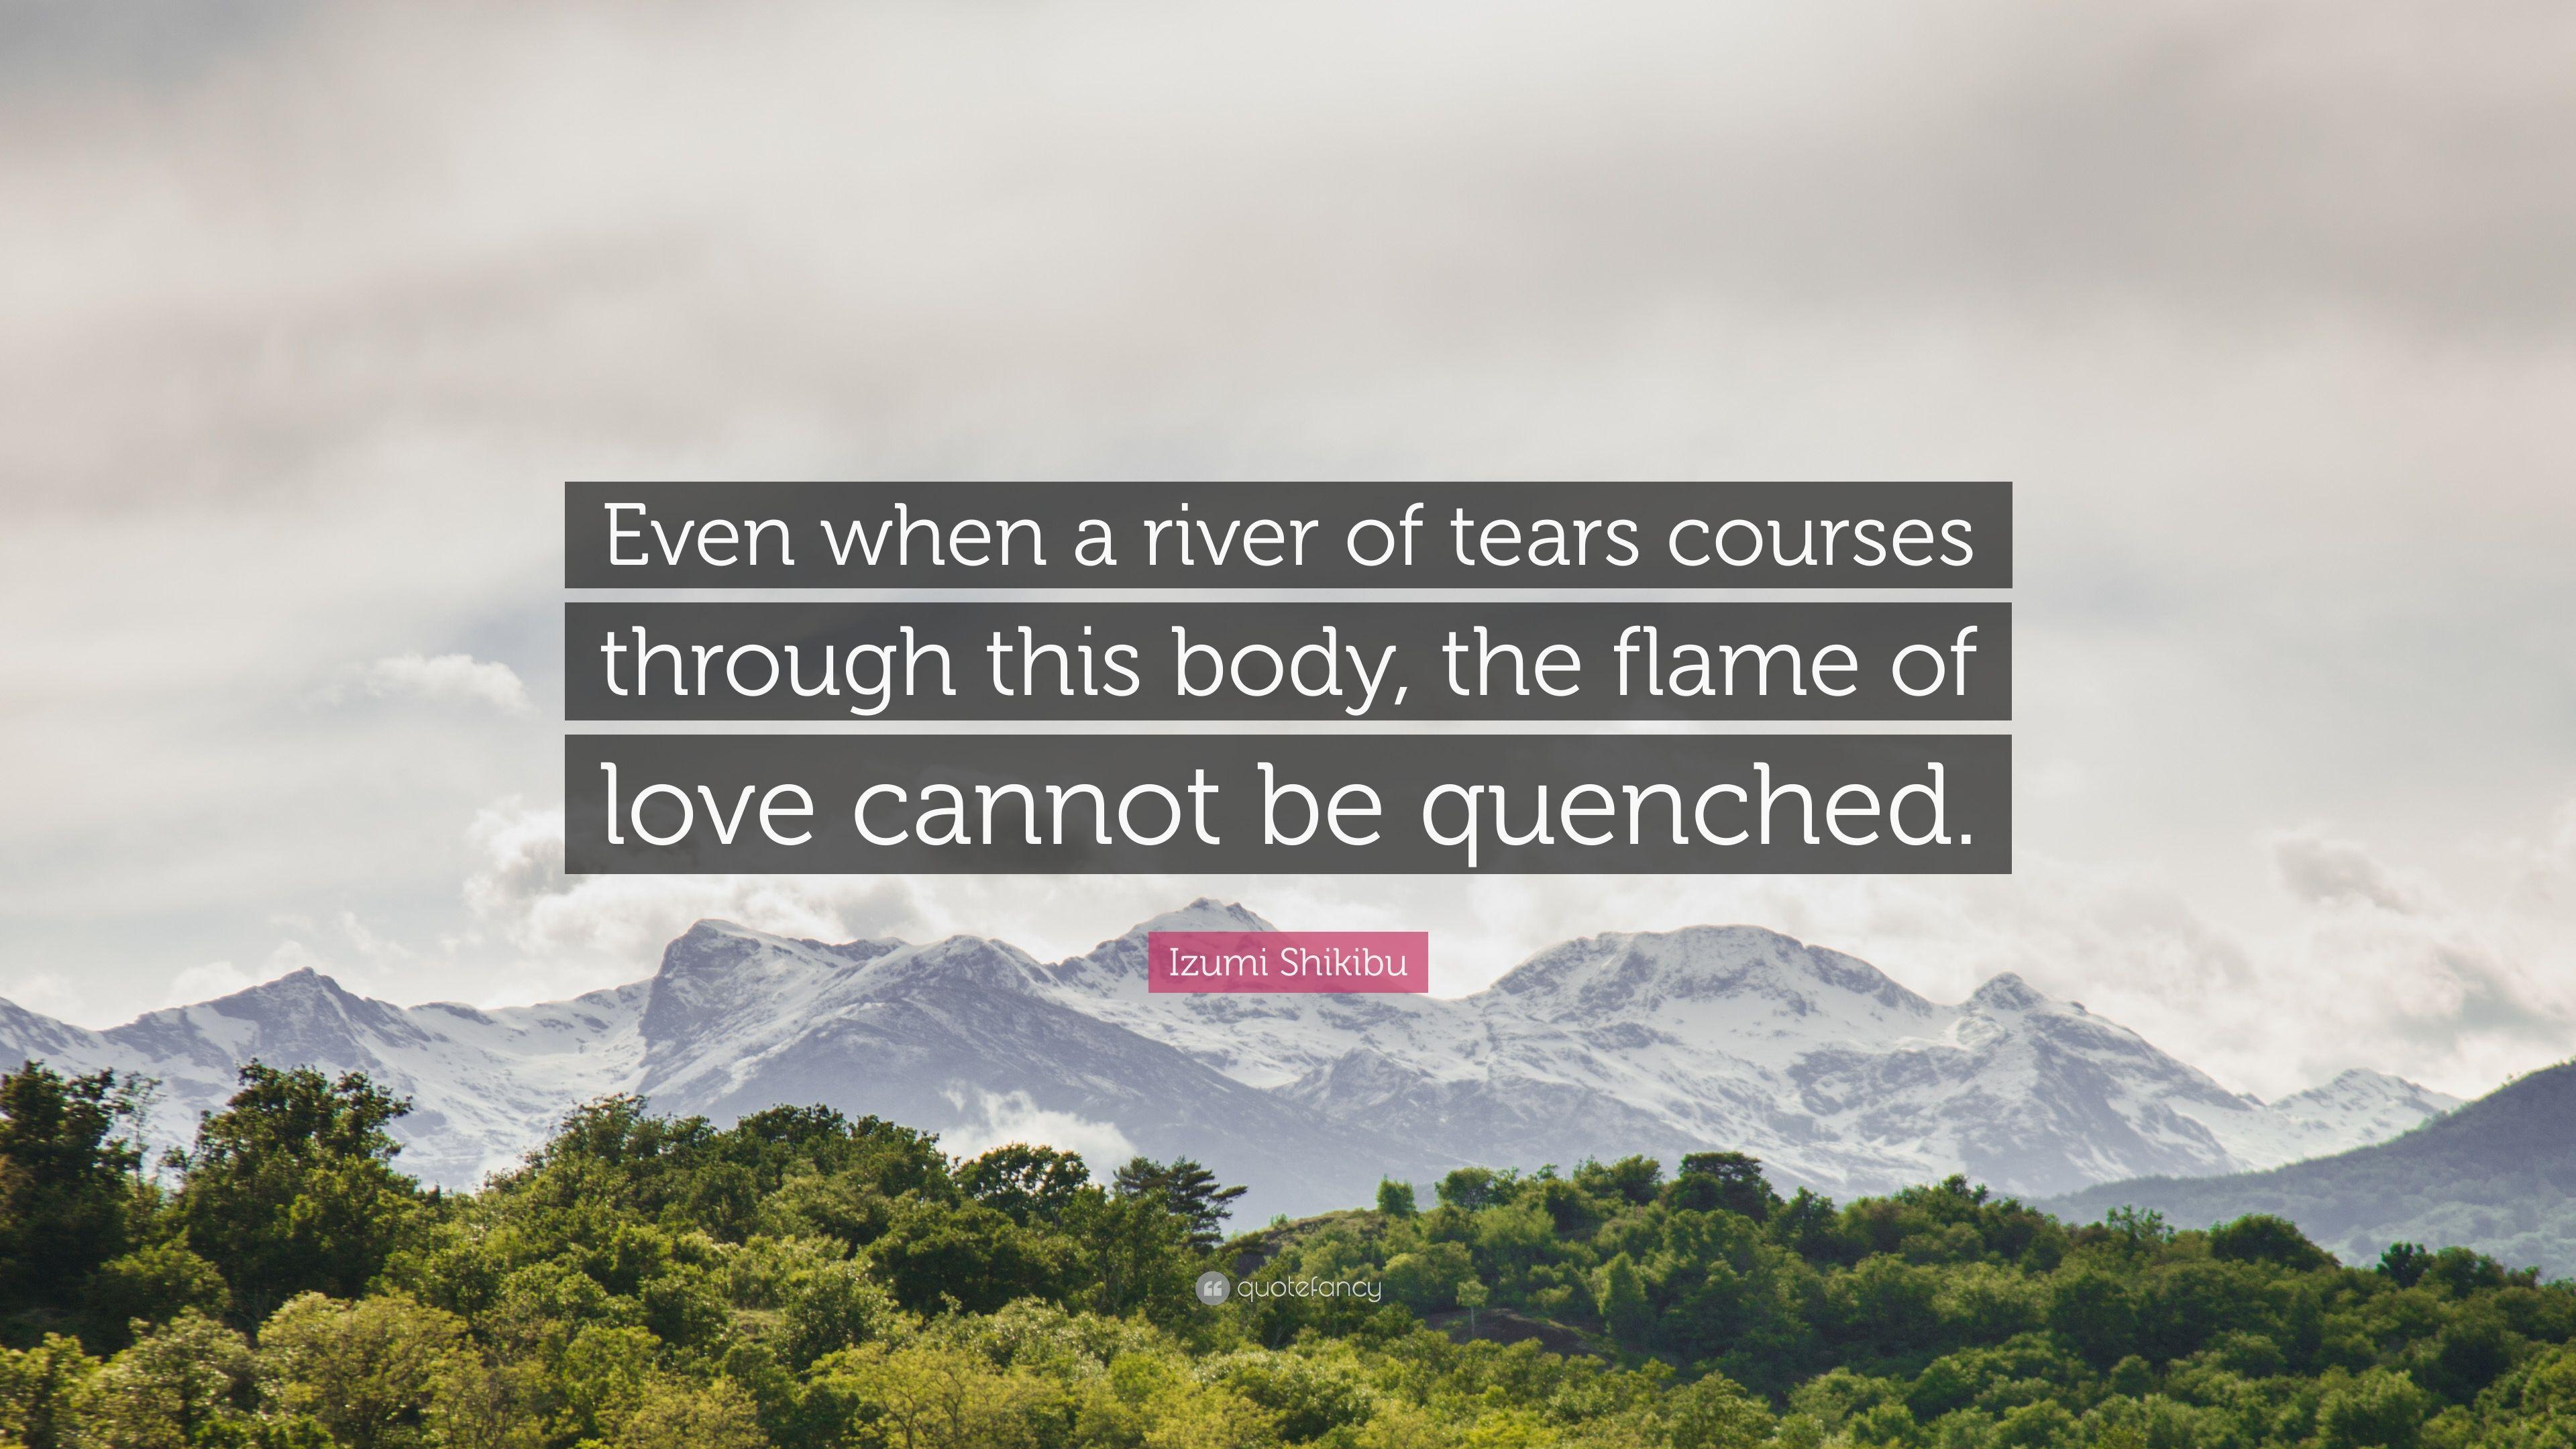 Izumi Shikibu Quote: “Even when a river of tears courses through